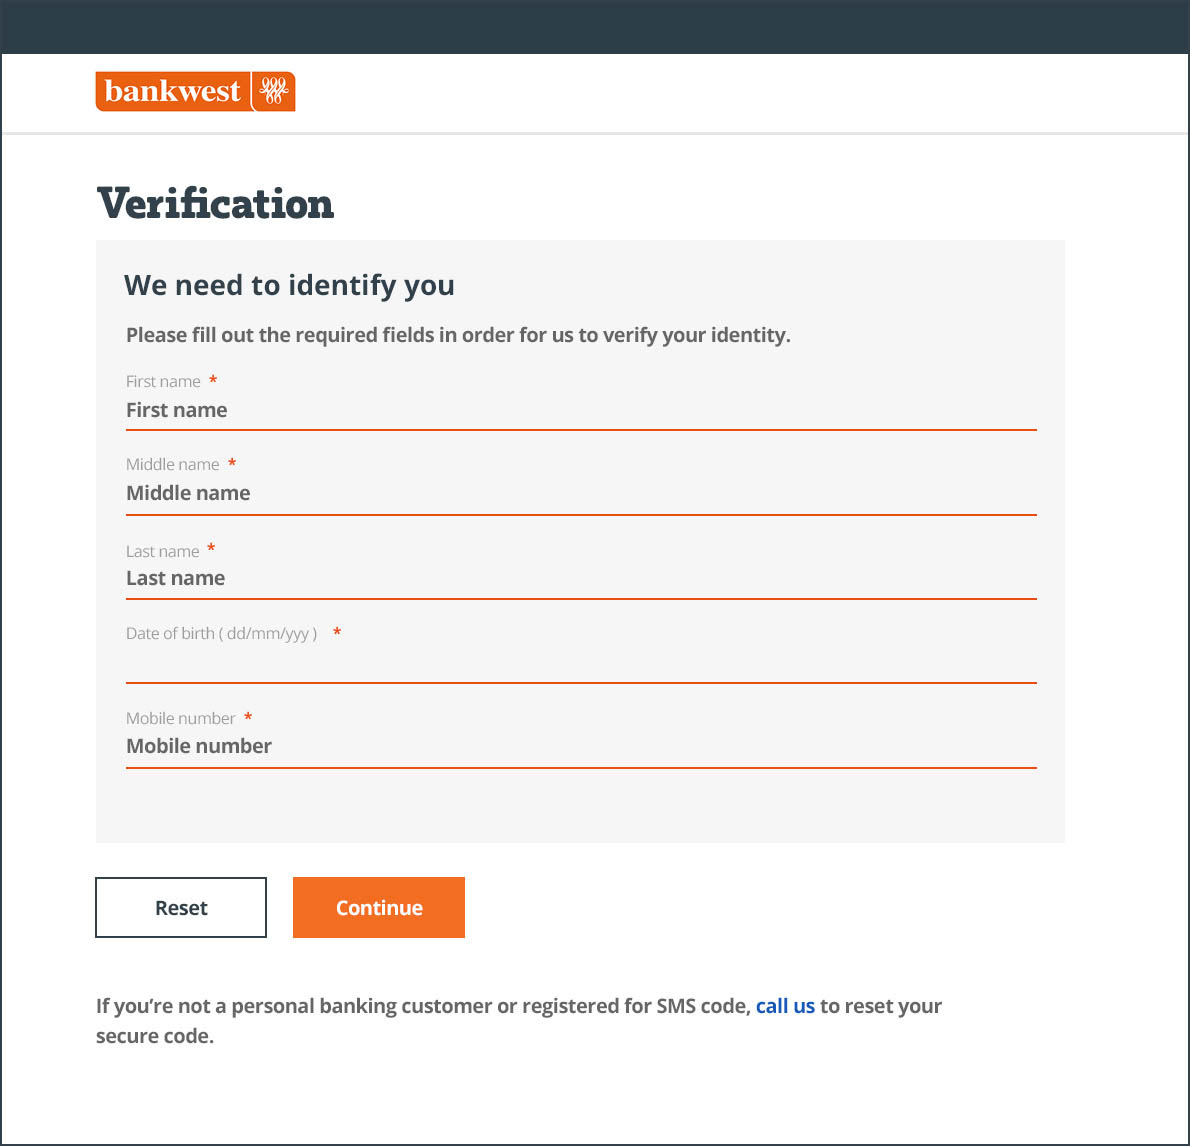 Image example of a fake 'Verification' form asking for personal information